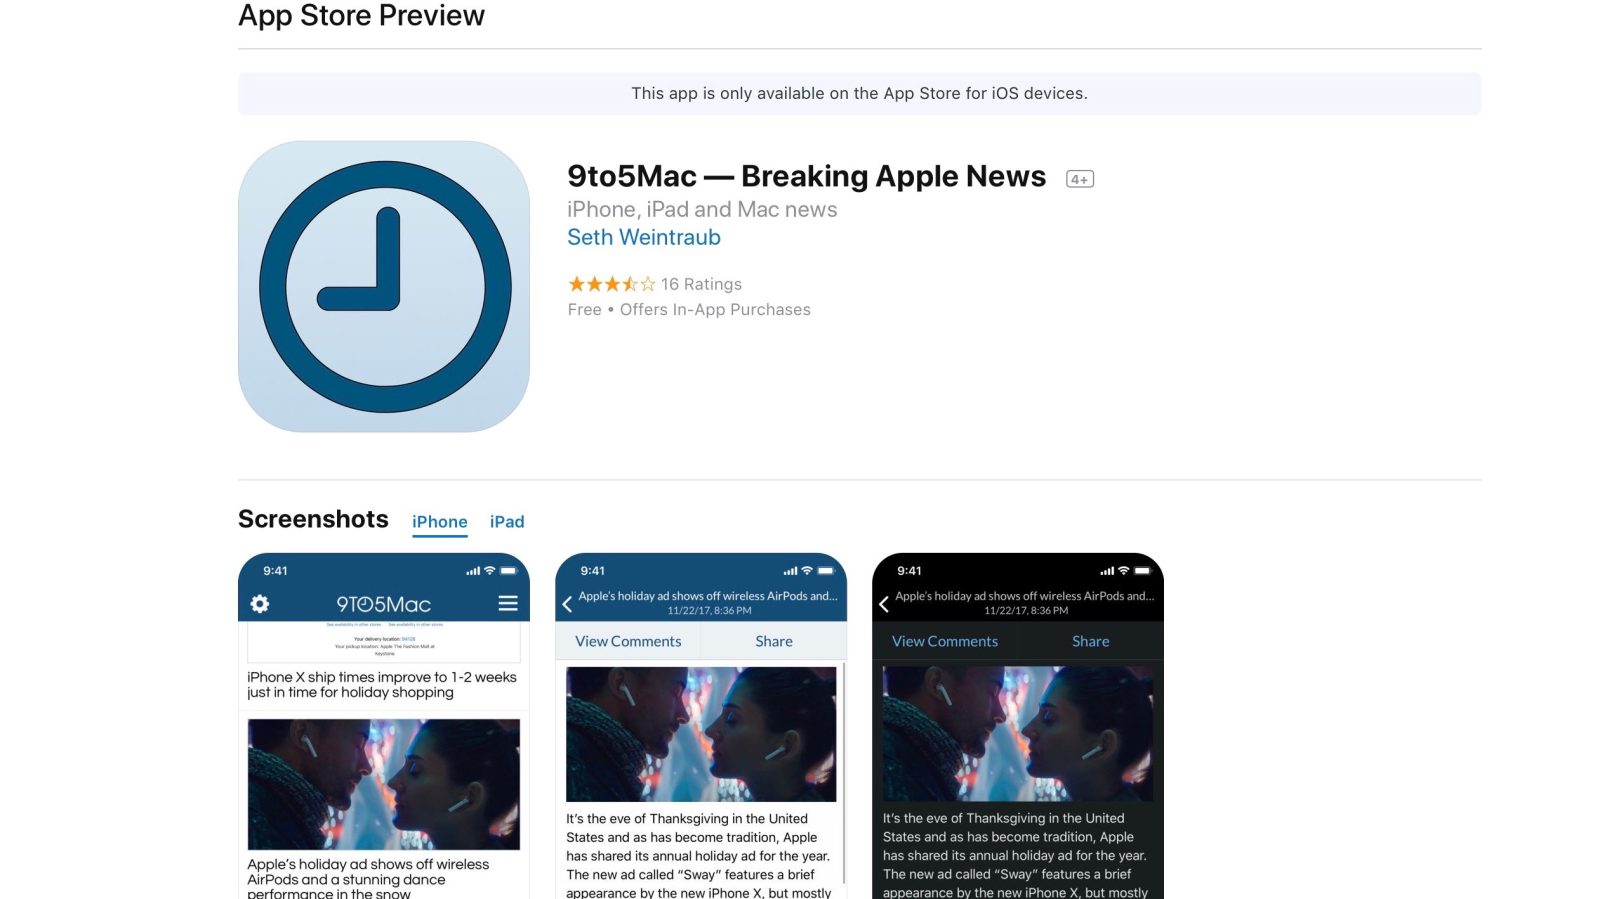 Apple overhauls App Store web interface with new iOS-like design - 9to5Mac